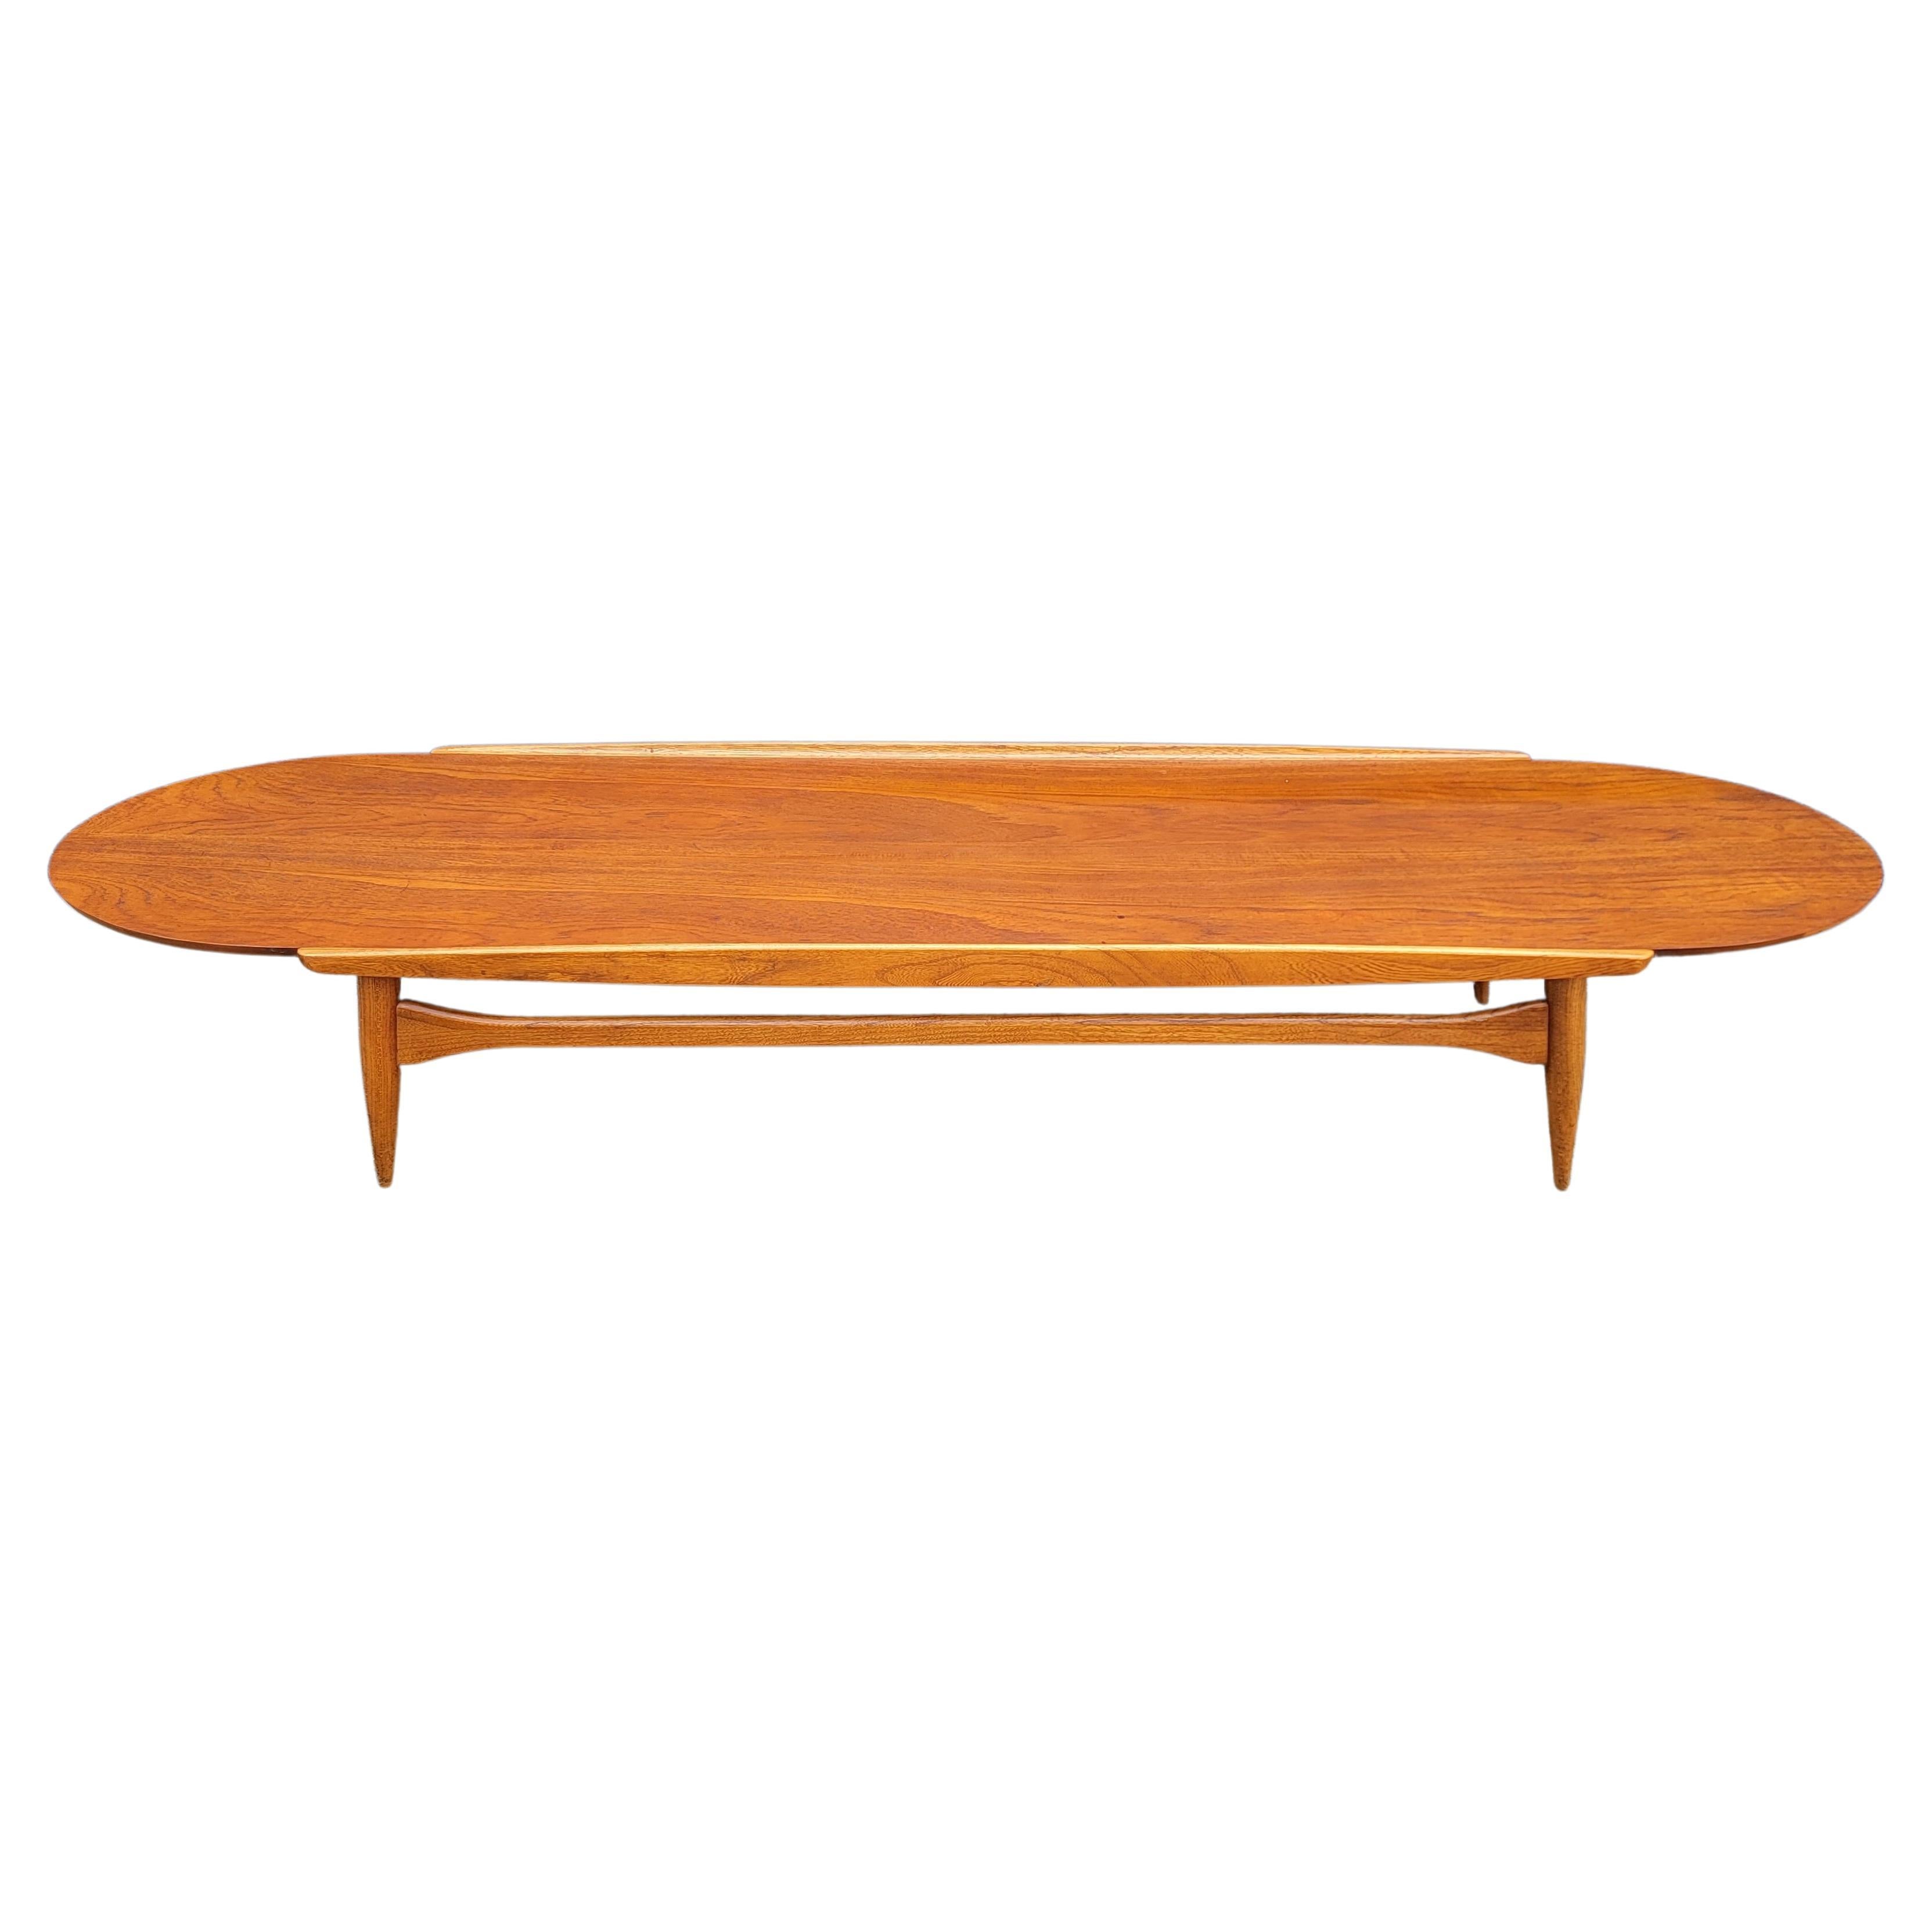 Surfboard Coffee Table by Lane Furniture